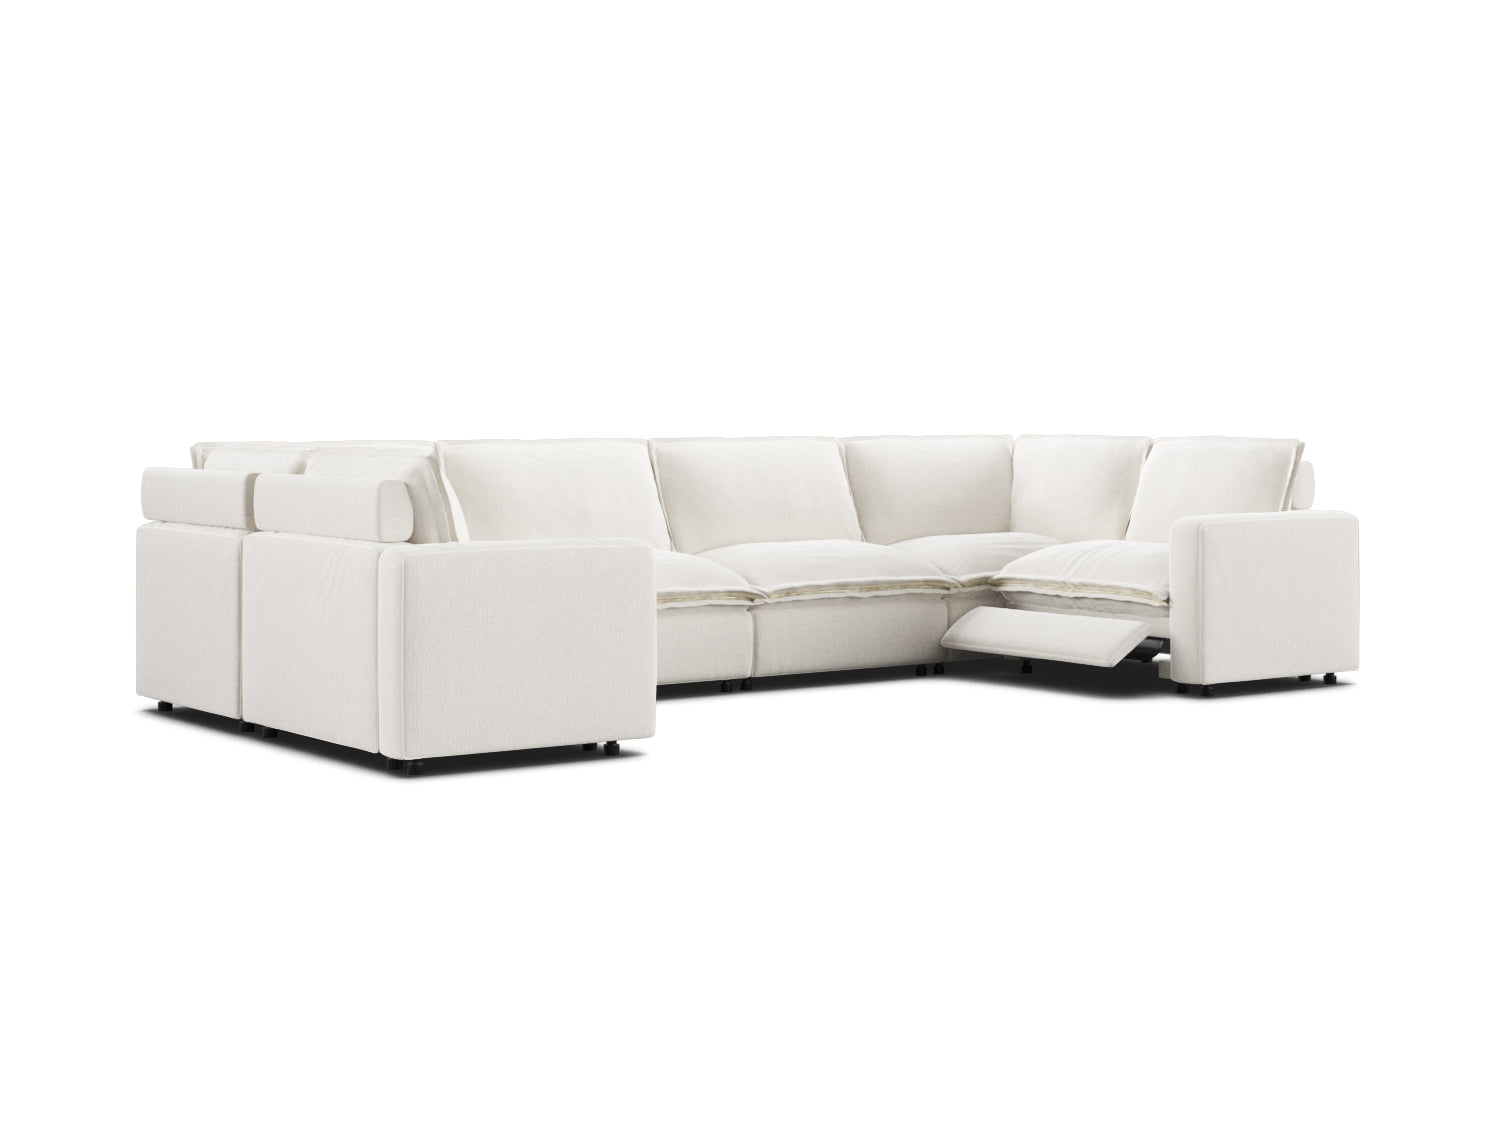 U-shaped sectionals allow groups or families to face one another